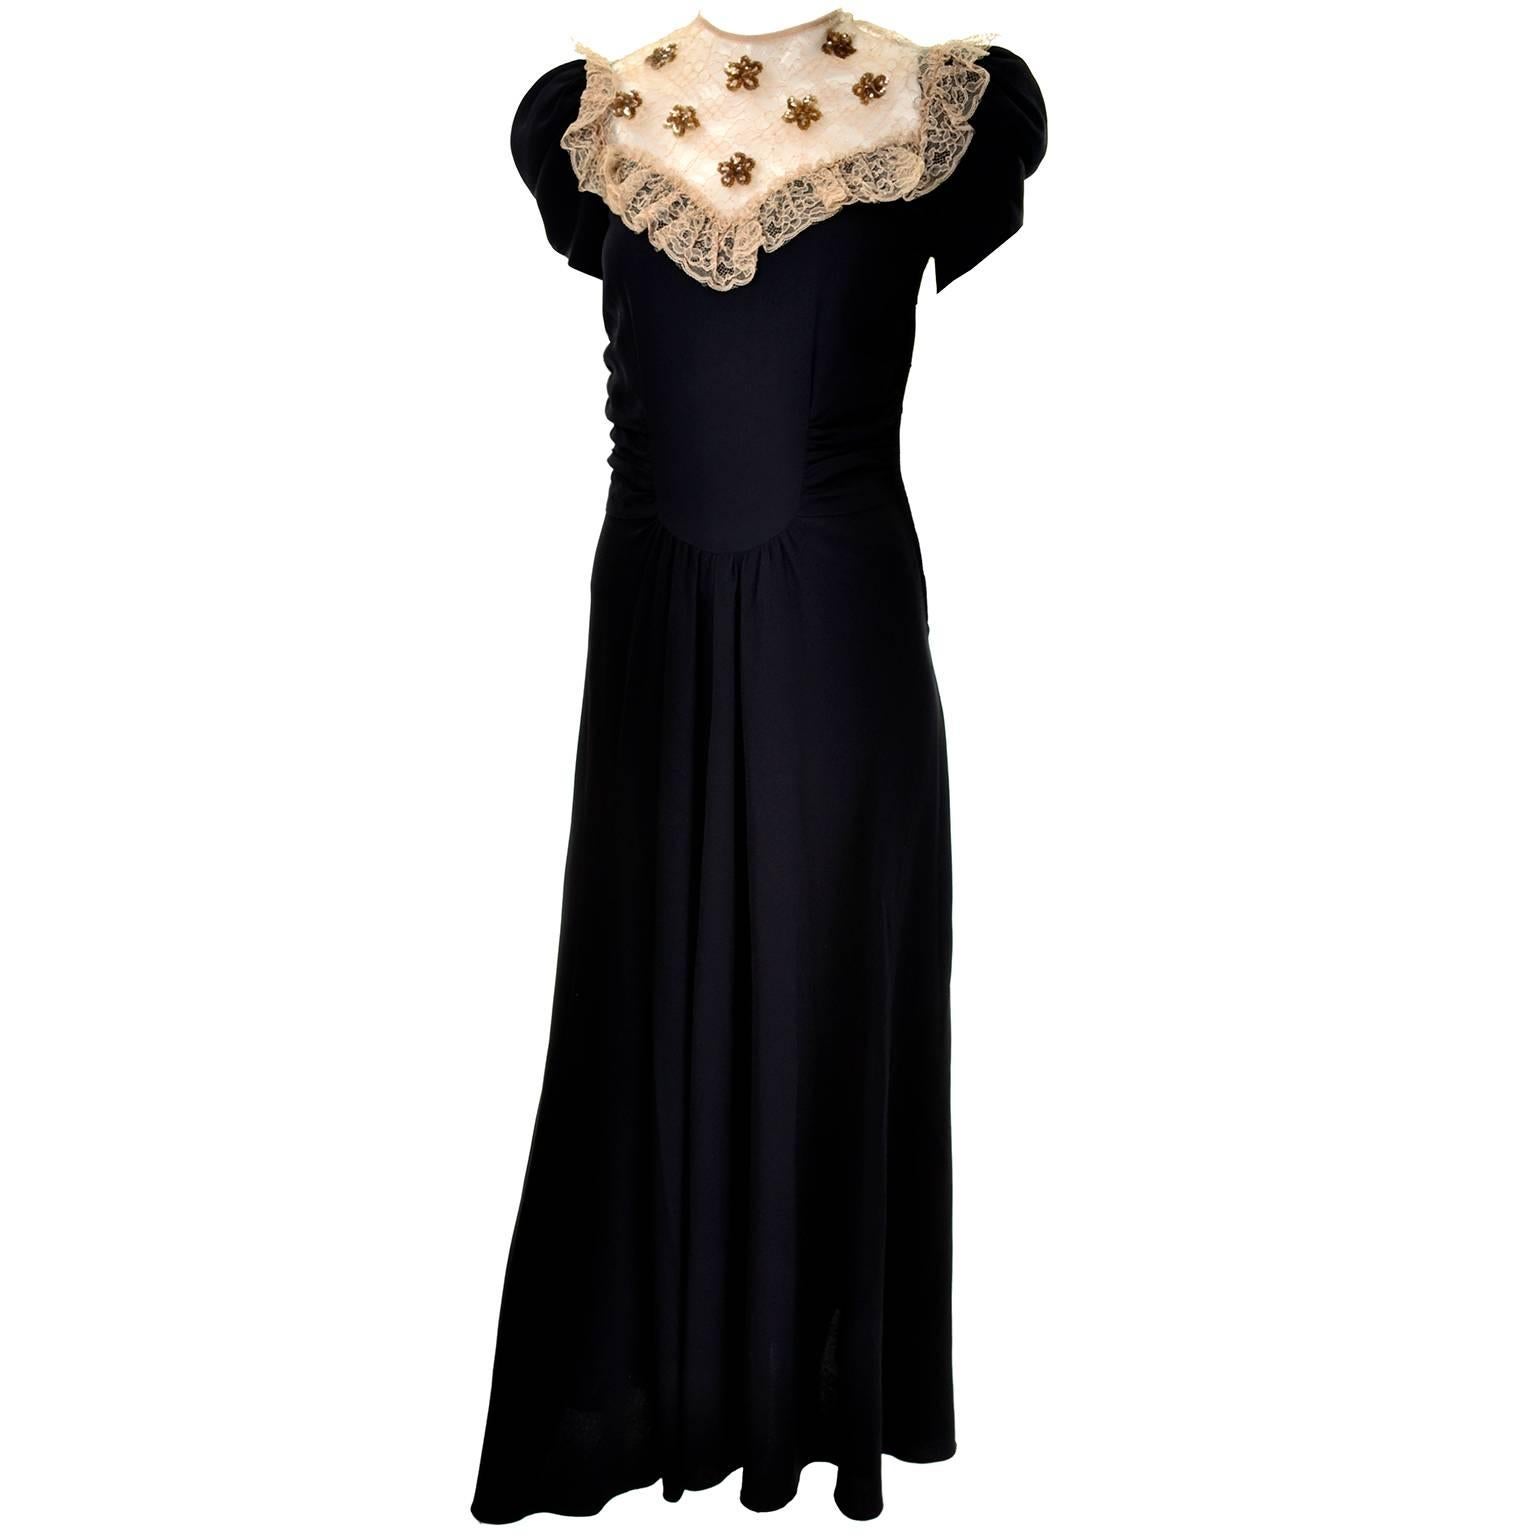 This is a wonderful vintage dress from the 1930's.  The dress is made of a black rayon crepe with a beautiful bodice that has gold netting and gold sequin flowers.  The sleeves are rouched and the dress has a back zipper. This evening gown is